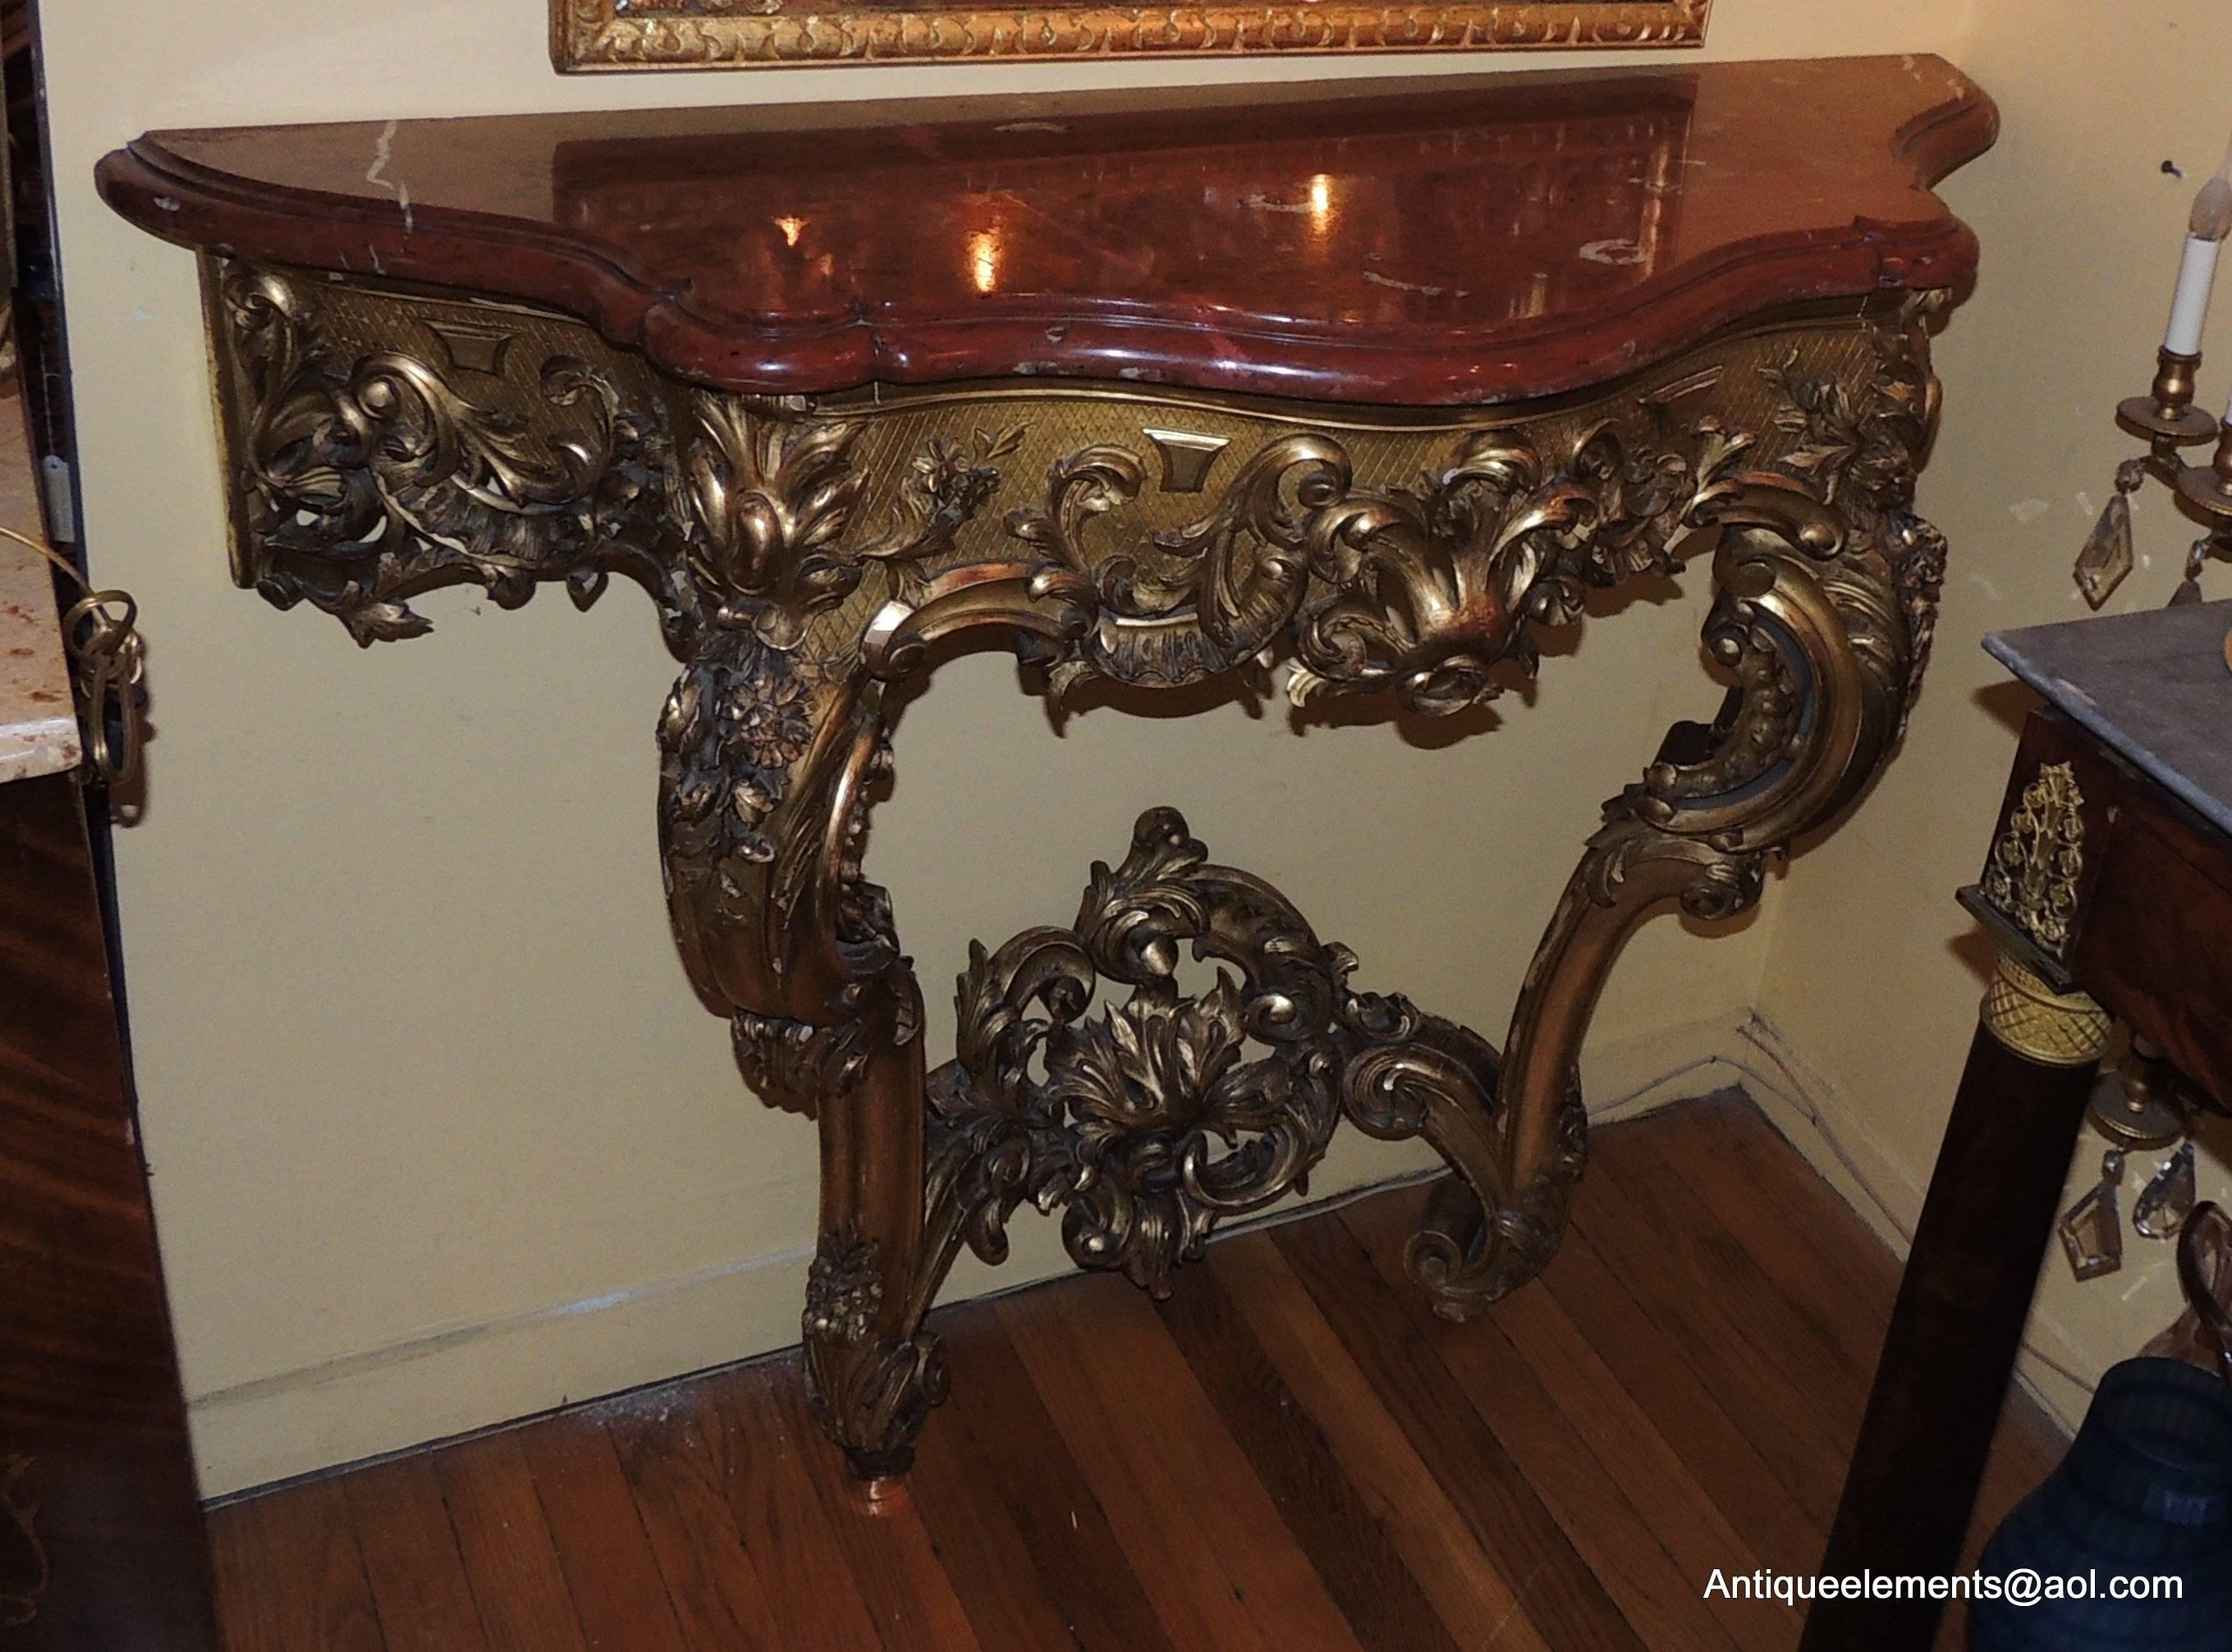 A wonderful 19th century giltwood carved console with original beautiful Rouge marble. The intricate floral and scroll carved detail make this a beautiful console for your special room or entry way. Marble has an old repair, completely